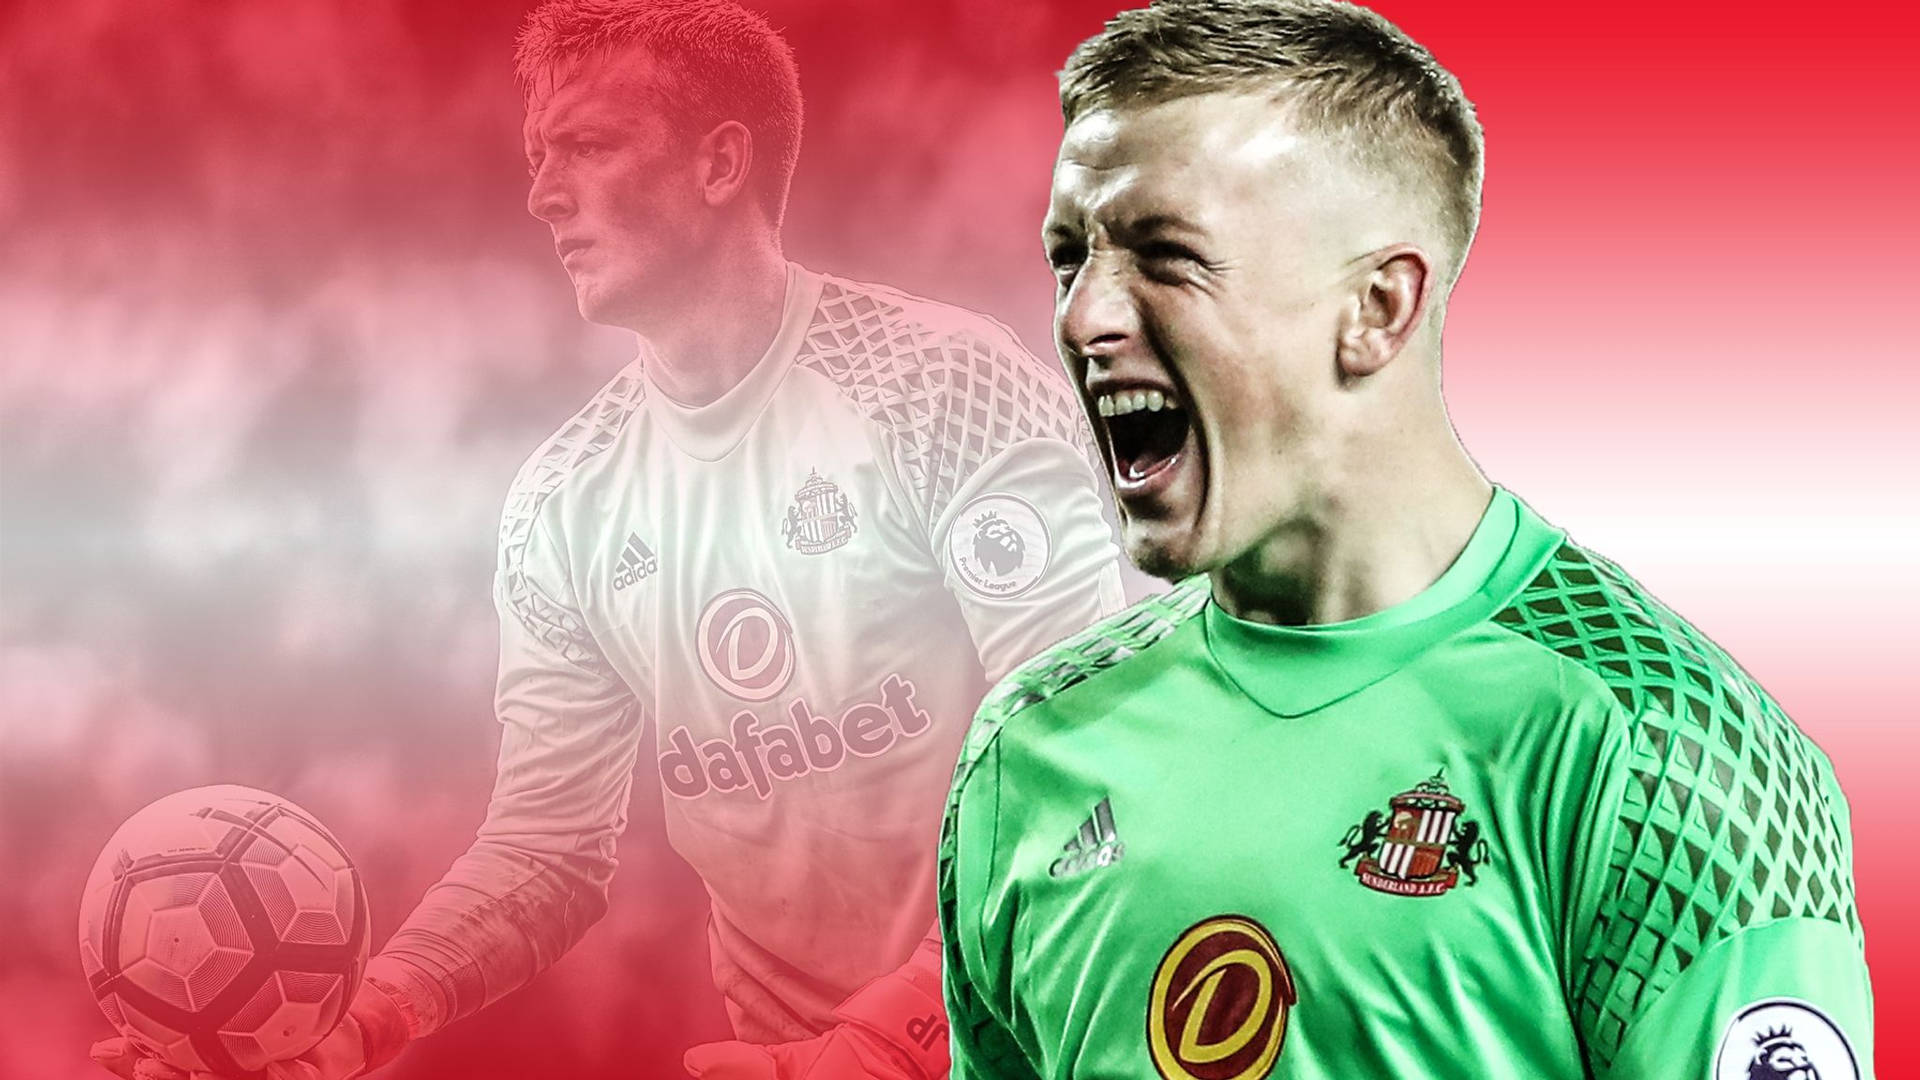 Jordan Pickford With Red Gradient Background